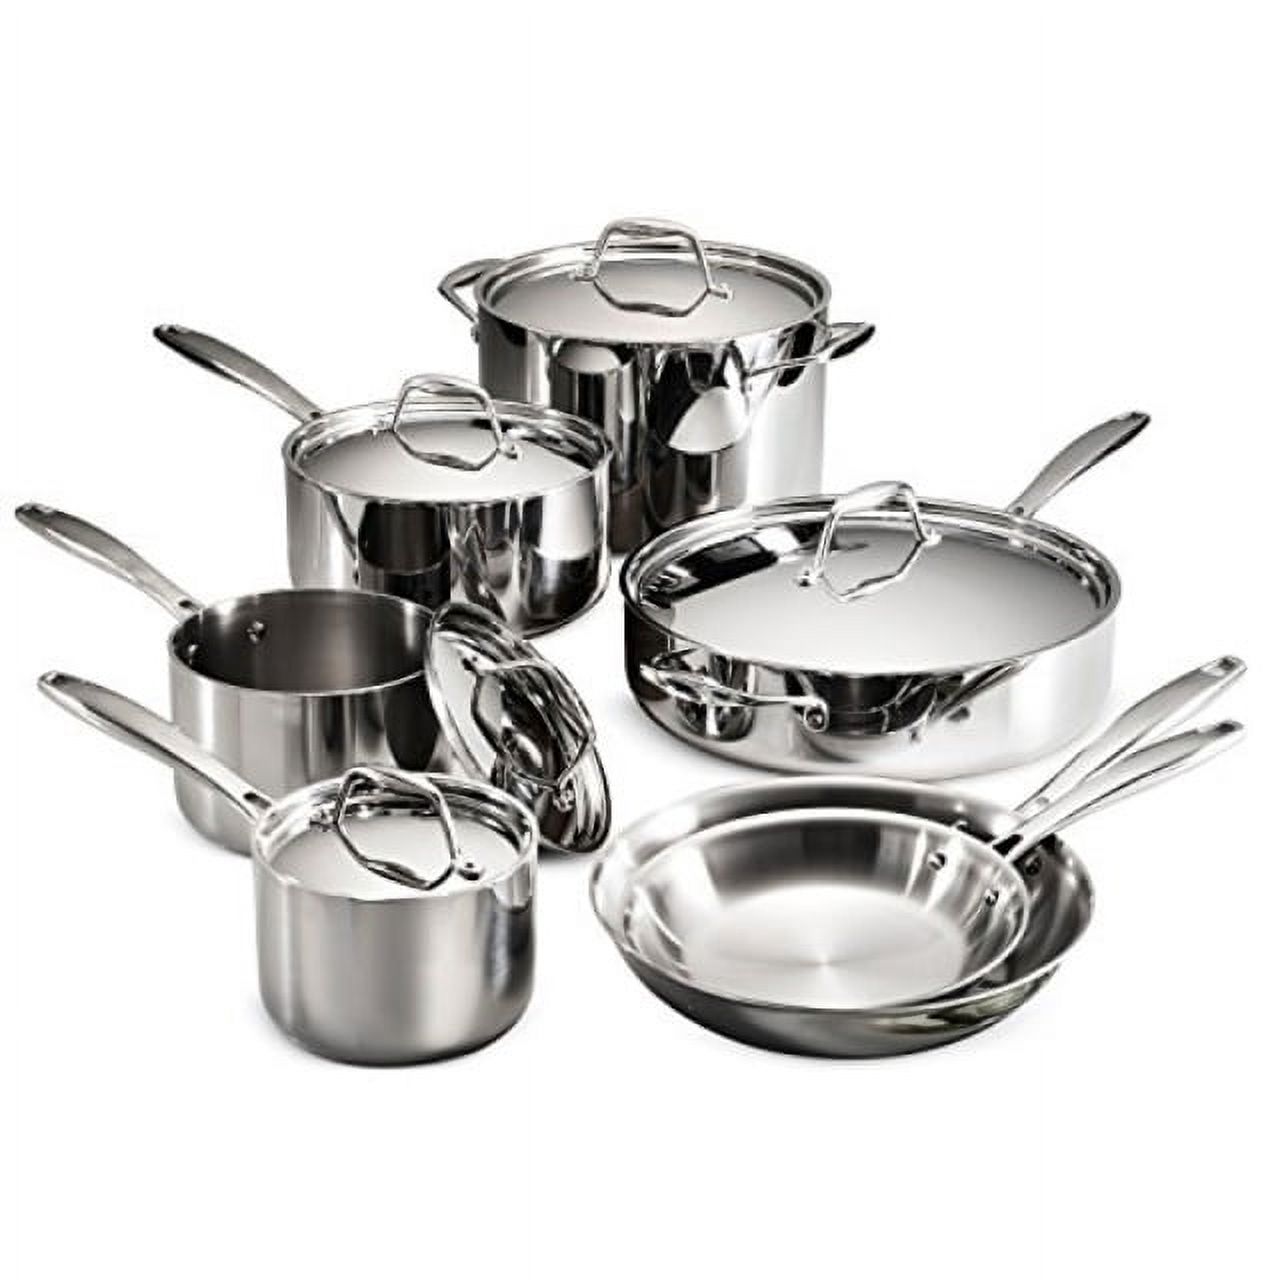 Tramontina 80116/249DS Gourmet Stainless Steel Induction-Ready Tri-Ply Clad 12-Piece Cookware Set, NSF-Certified, Made in Brazil - image 1 of 6